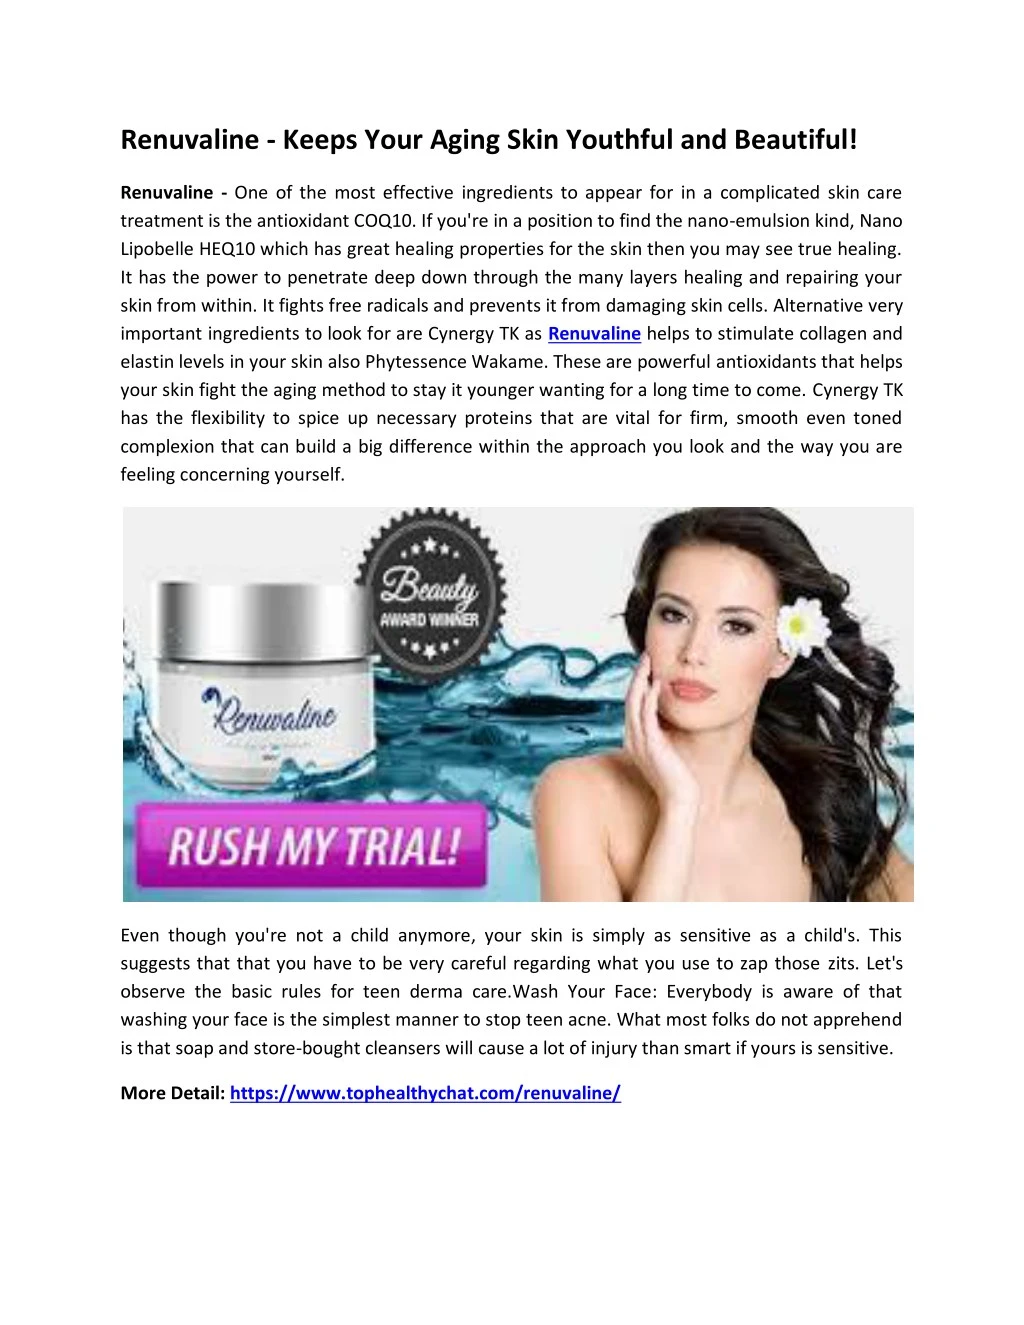 renuvaline keeps your aging skin youthful